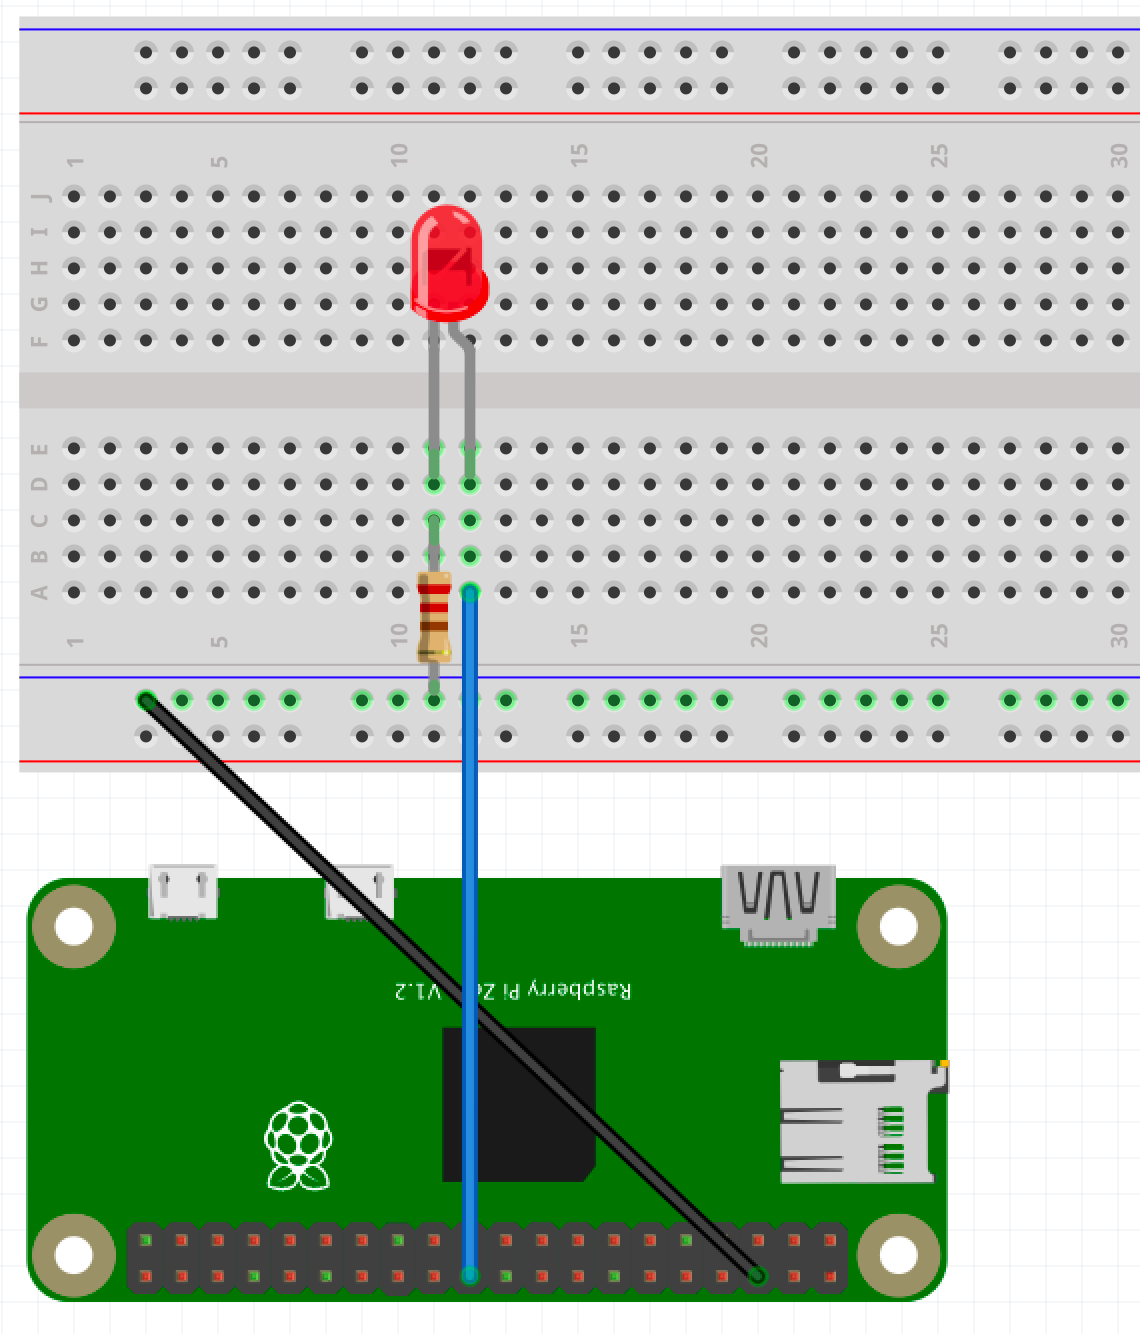 Controlling an External LED using a Raspberry Pi and GPIO pins | by Shahbaz  Ahmed | We've moved to freeCodeCamp.org/news | Medium